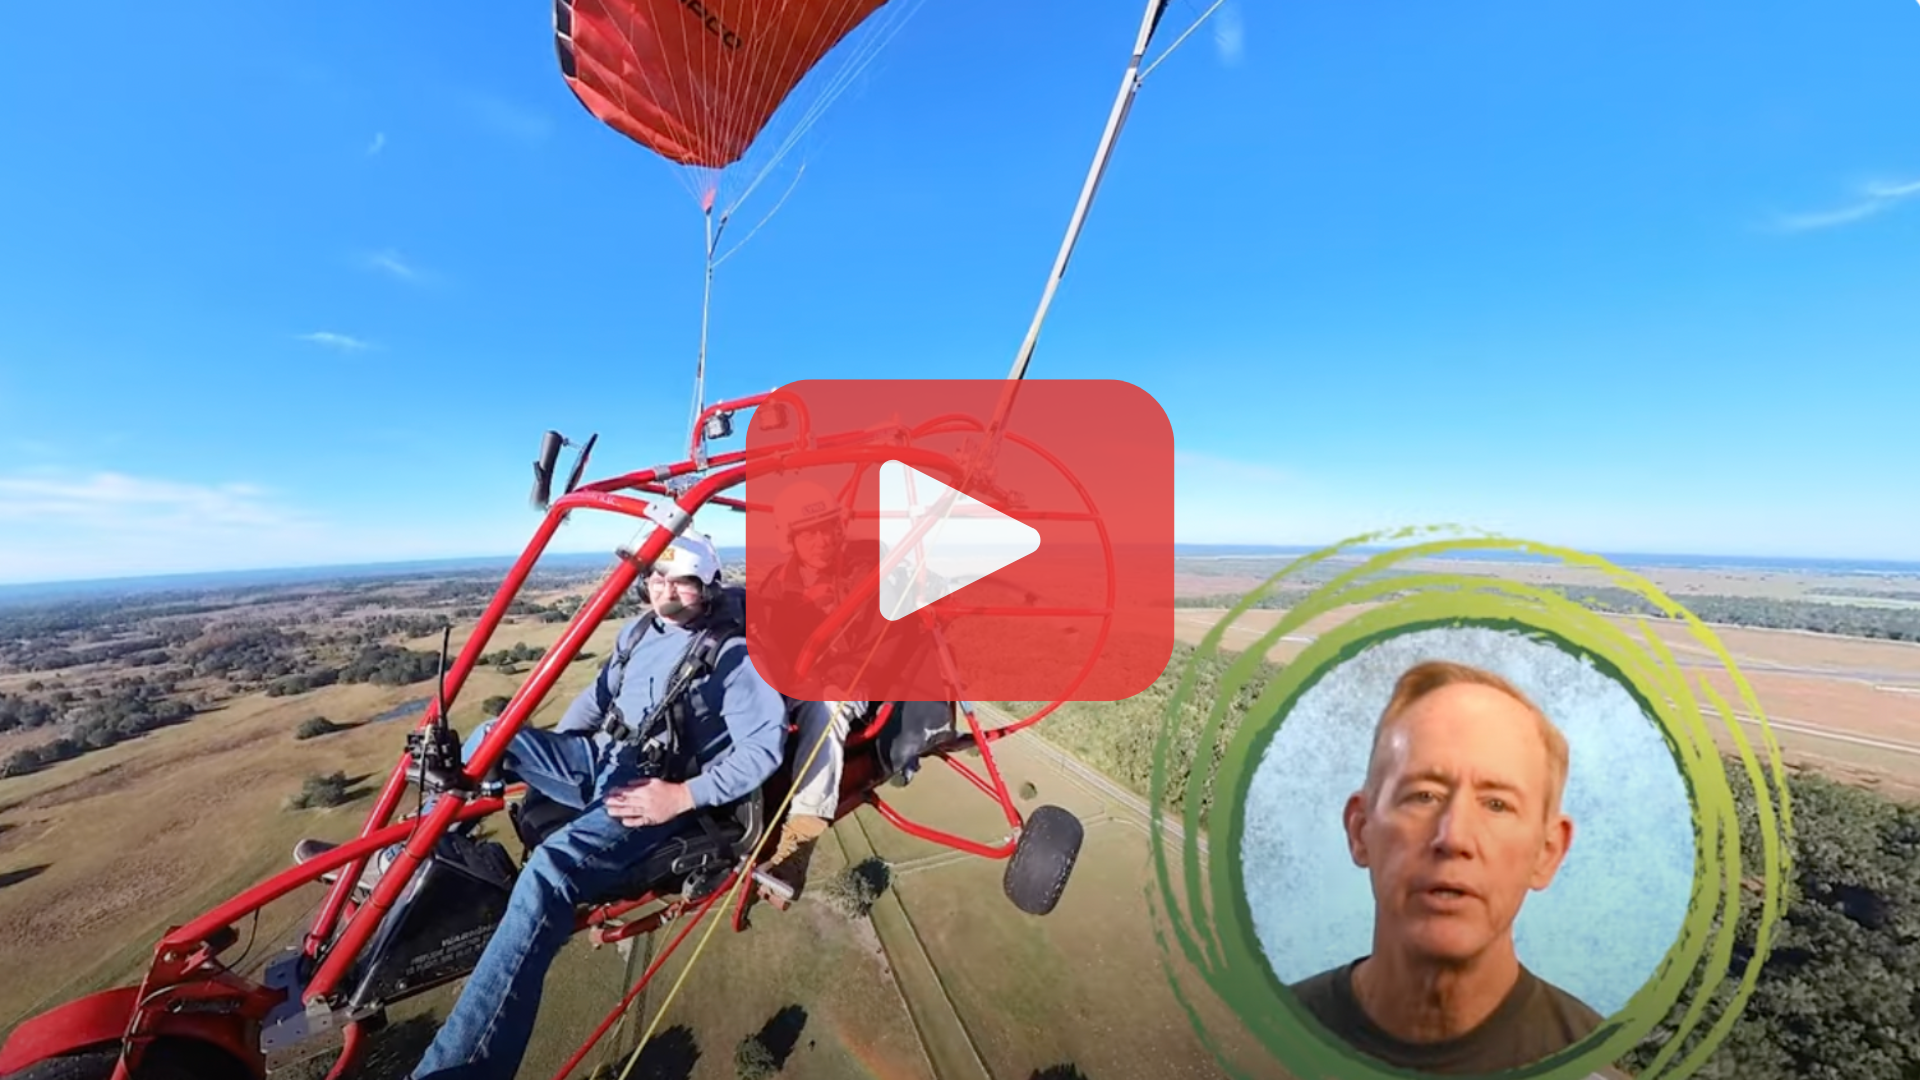 Easy Flight flashcards for learning powered parachute flight protocol